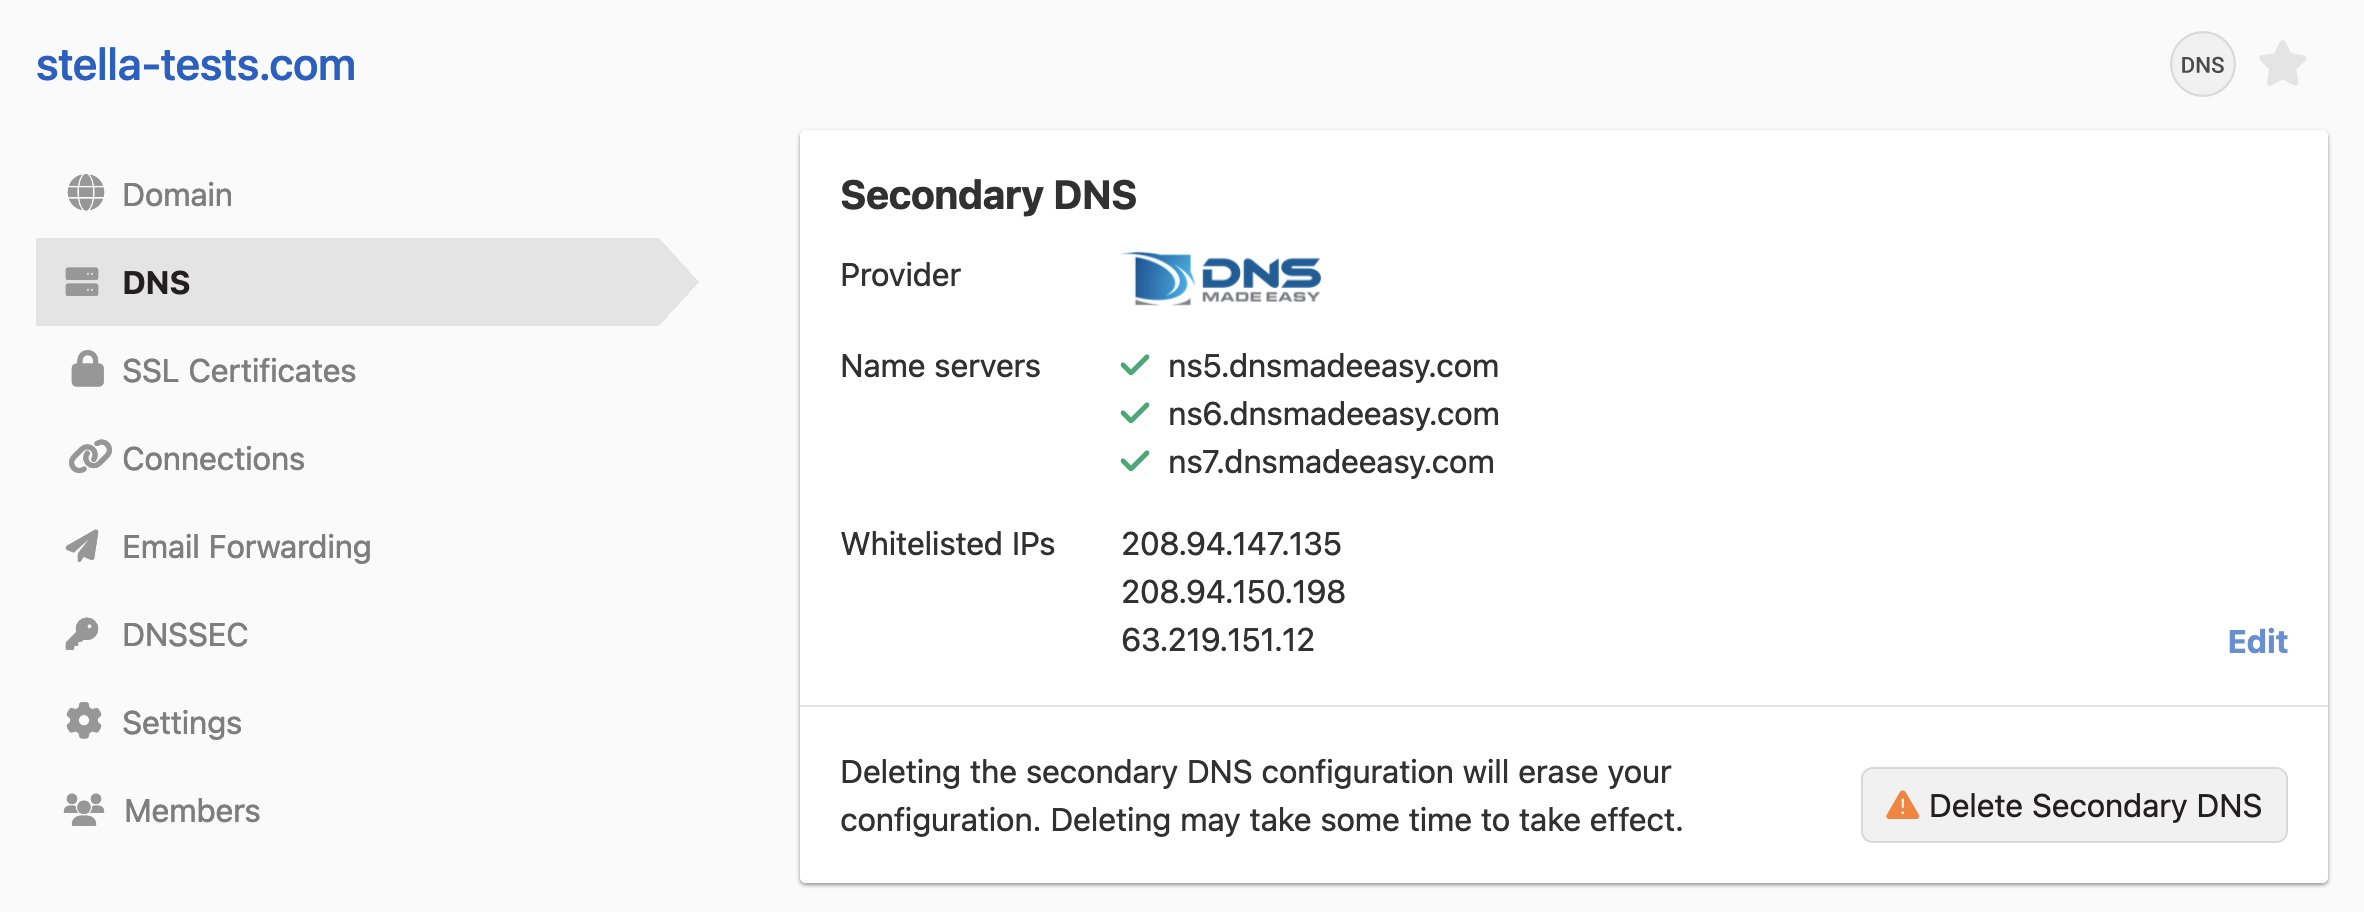 Updated DNS management page